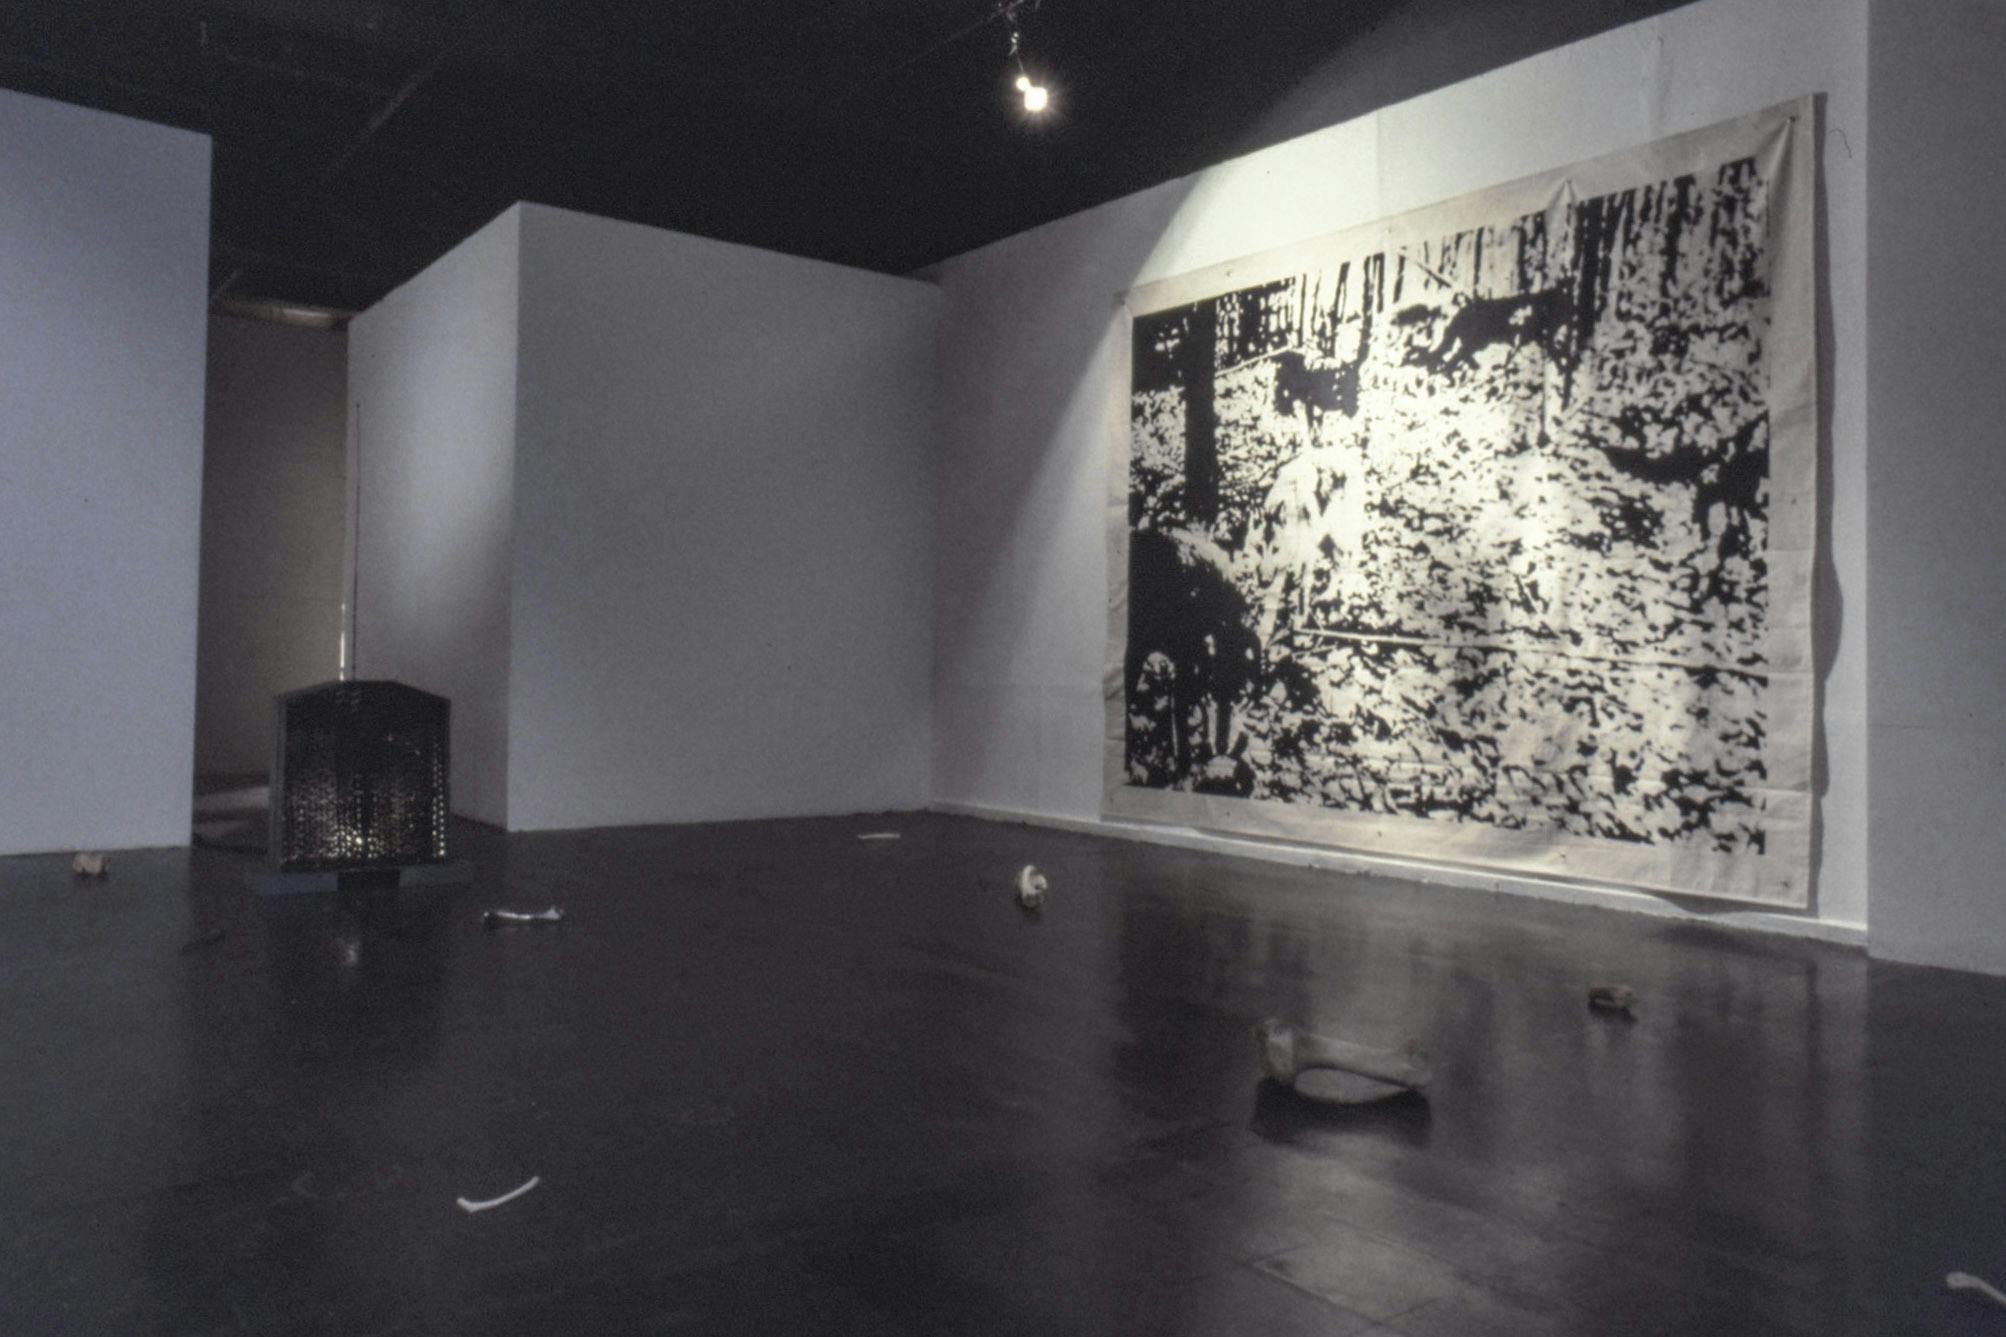 On the wall of a dark gallery space, there is a large piece of canvas shows a print of wolves in a forest. On the floor, there is a small glowing speaker as well several natural and cast steel bones.